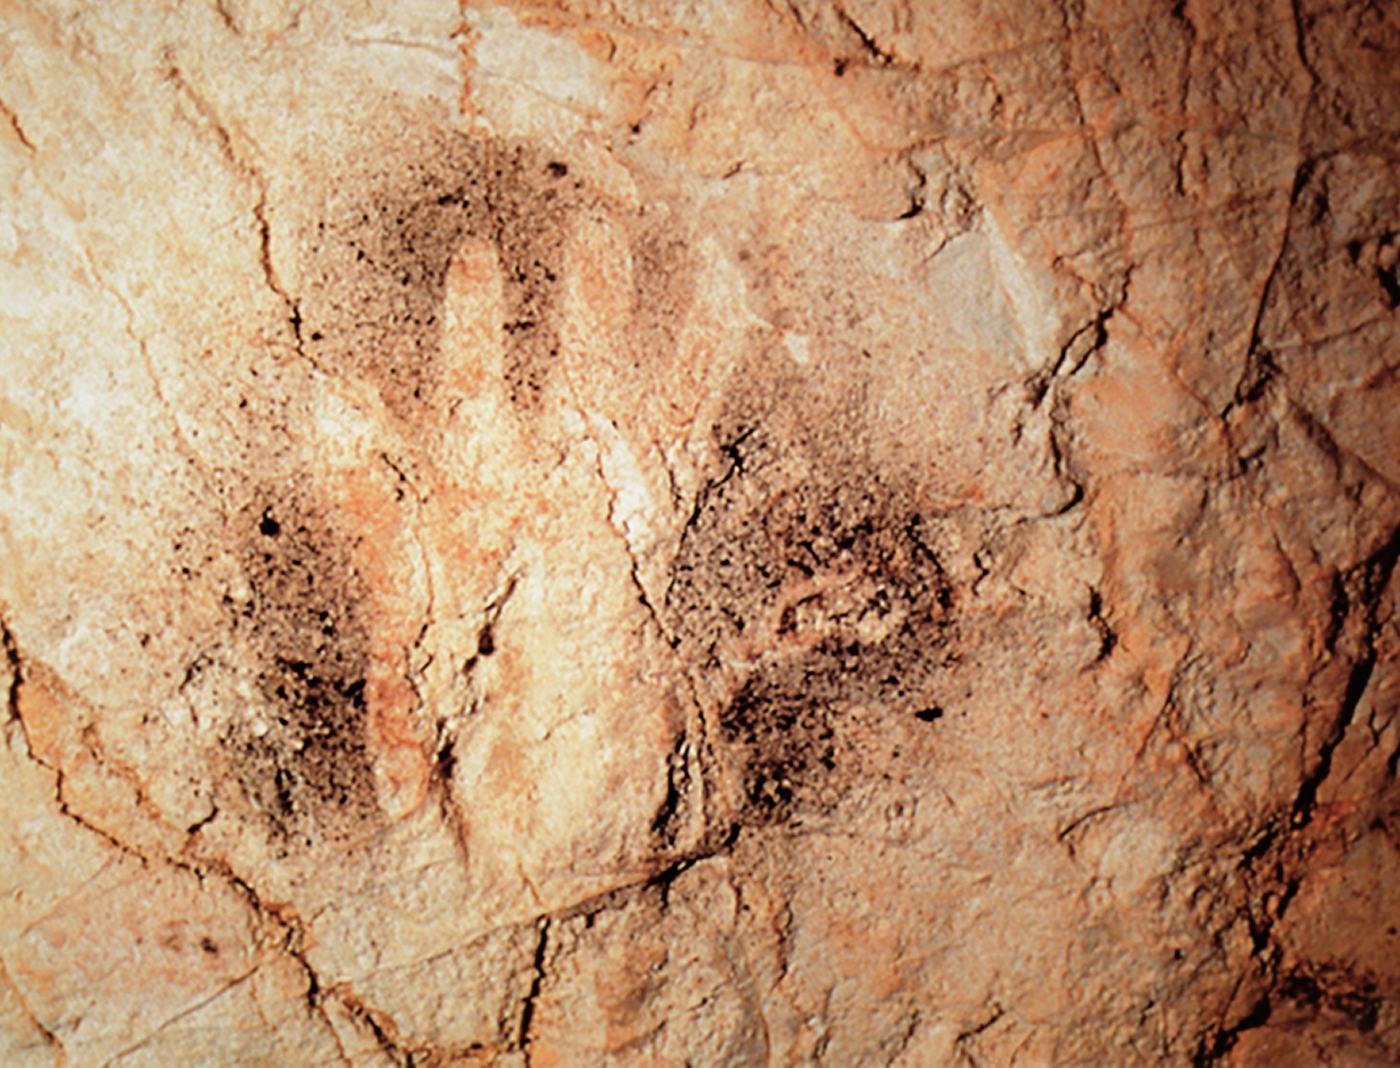 Hand stencils and prints can exclusively be found in the earliest periods of the art